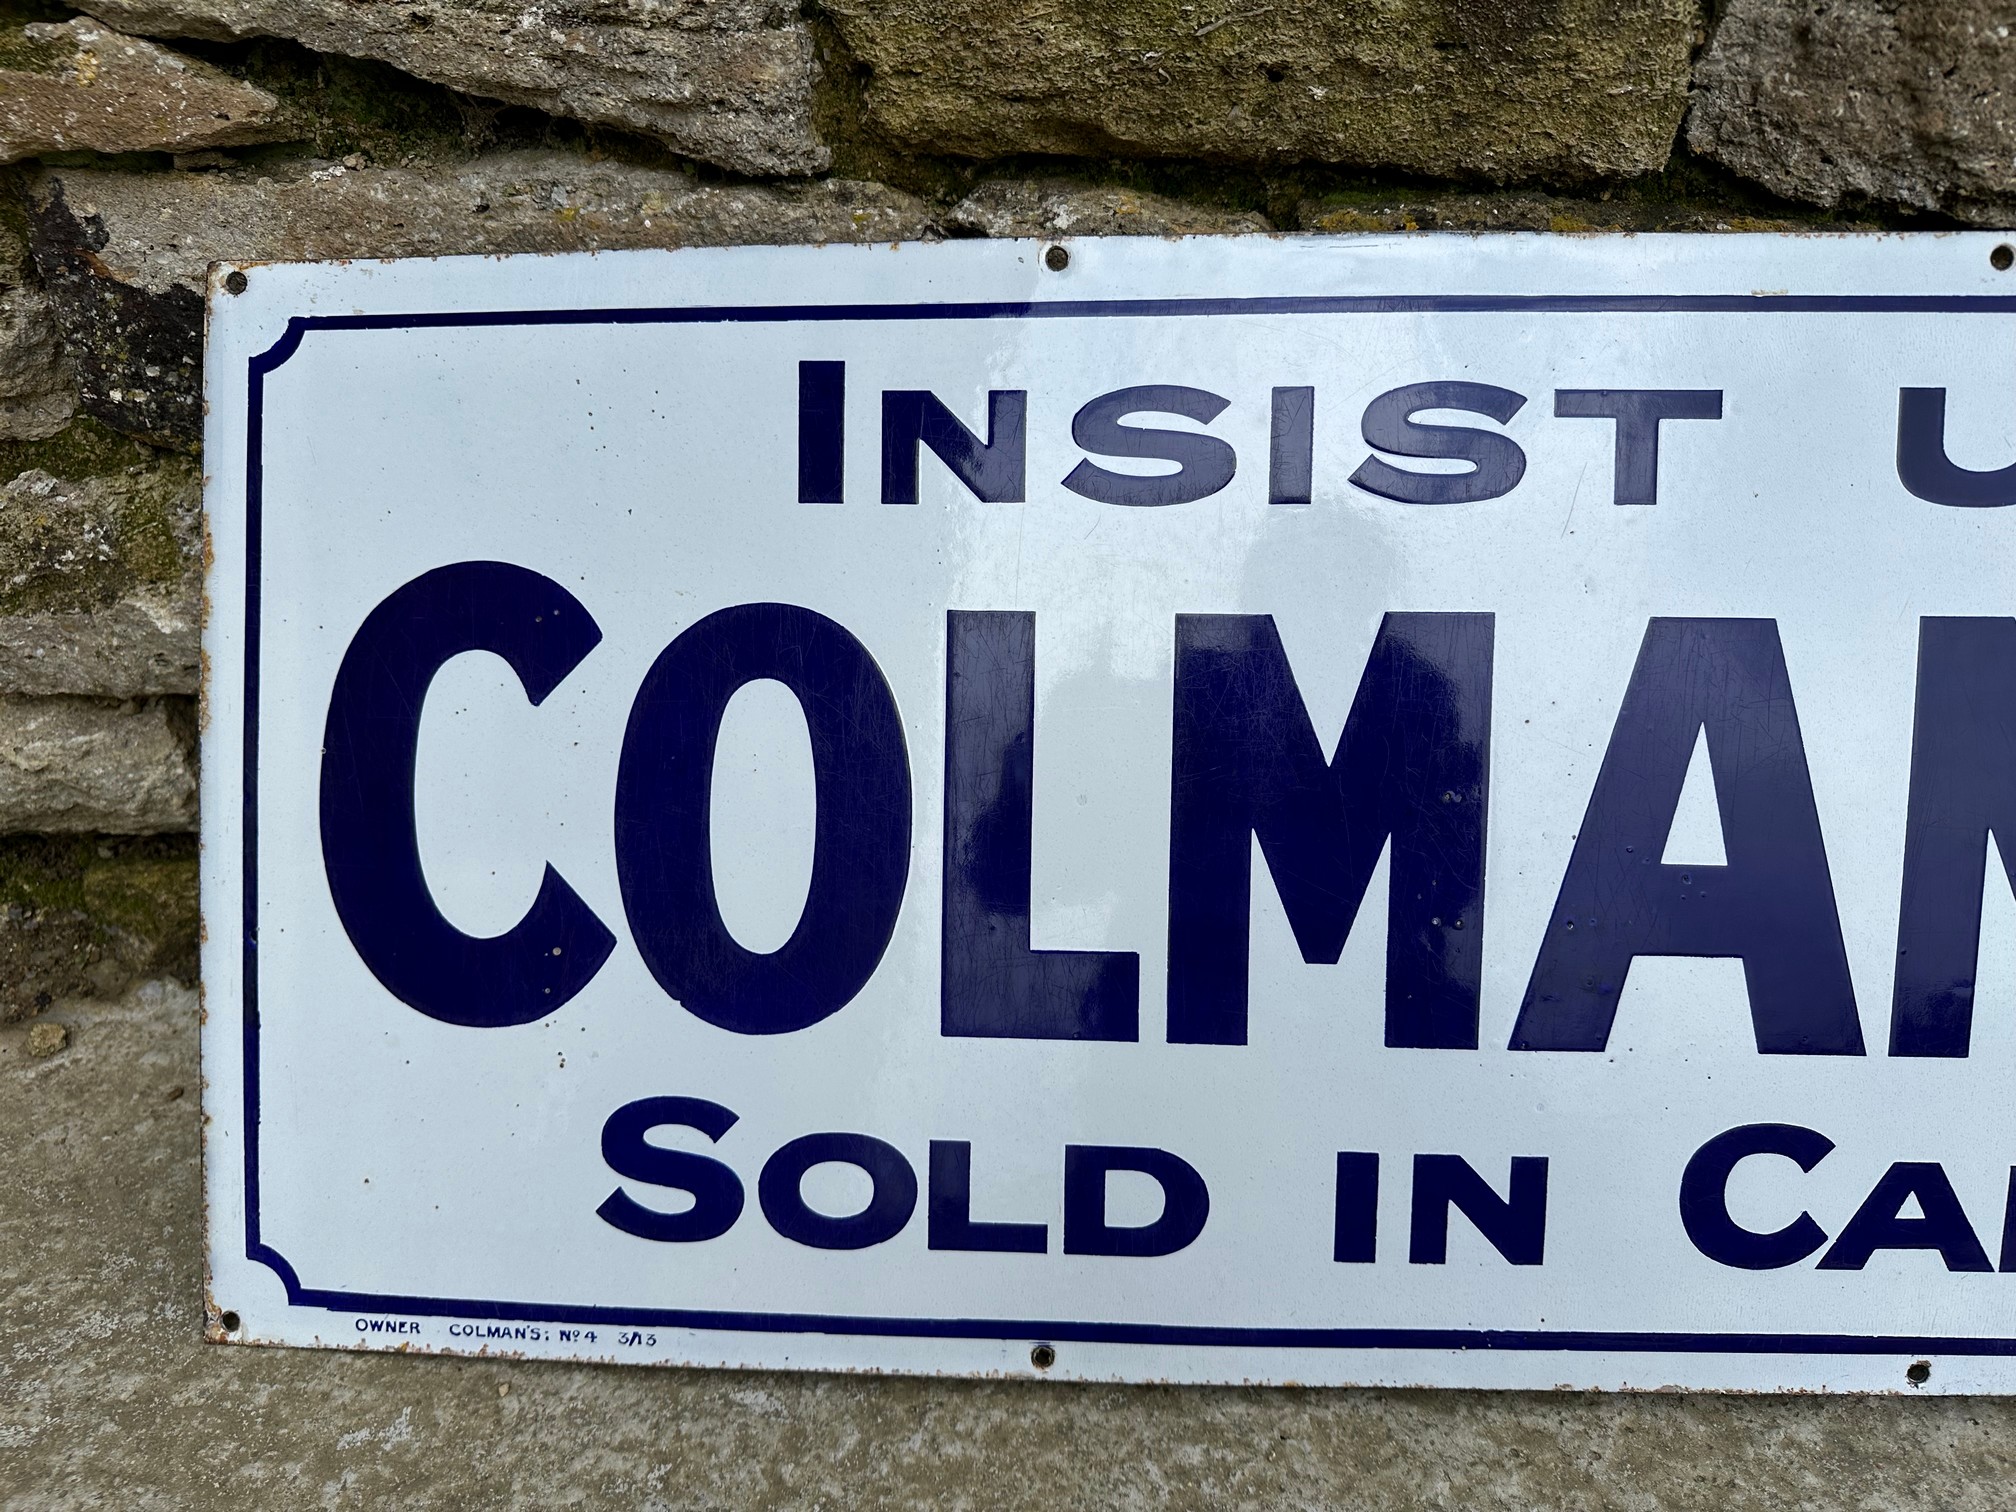 A Colman's Starch 'Sold in cardboard boxes' enamel advertising sign by Patent Enamel Co. Ltd. 62 1/2 - Image 3 of 5